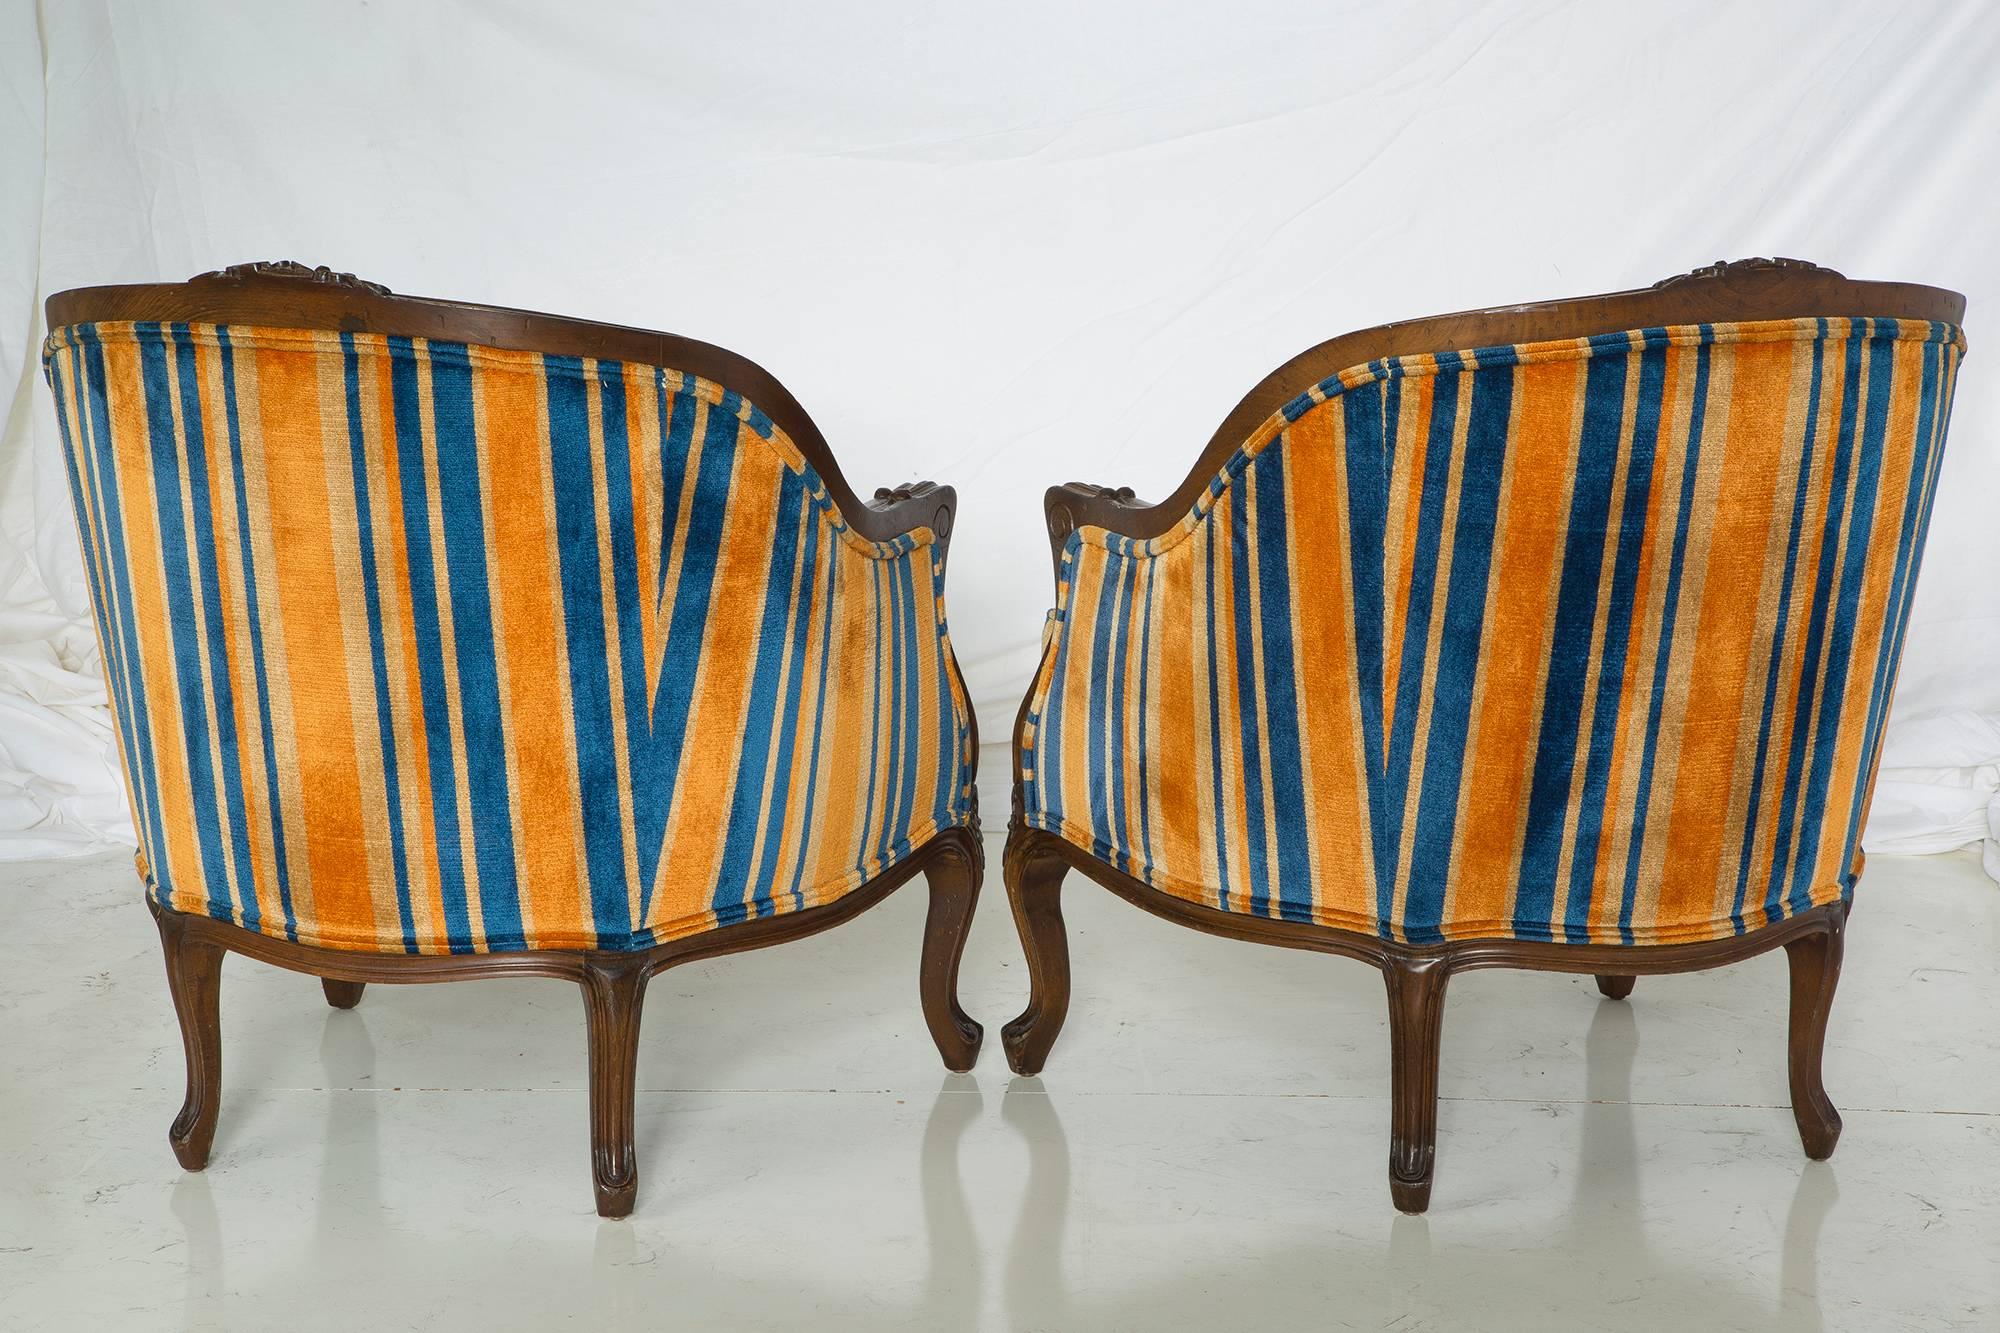 This pair of amazing 1940s salon lounge chairs is in truly remarkable condition, and so stylish and funky! The striped velvet upholstery is framed by the ornately carved walnut details.